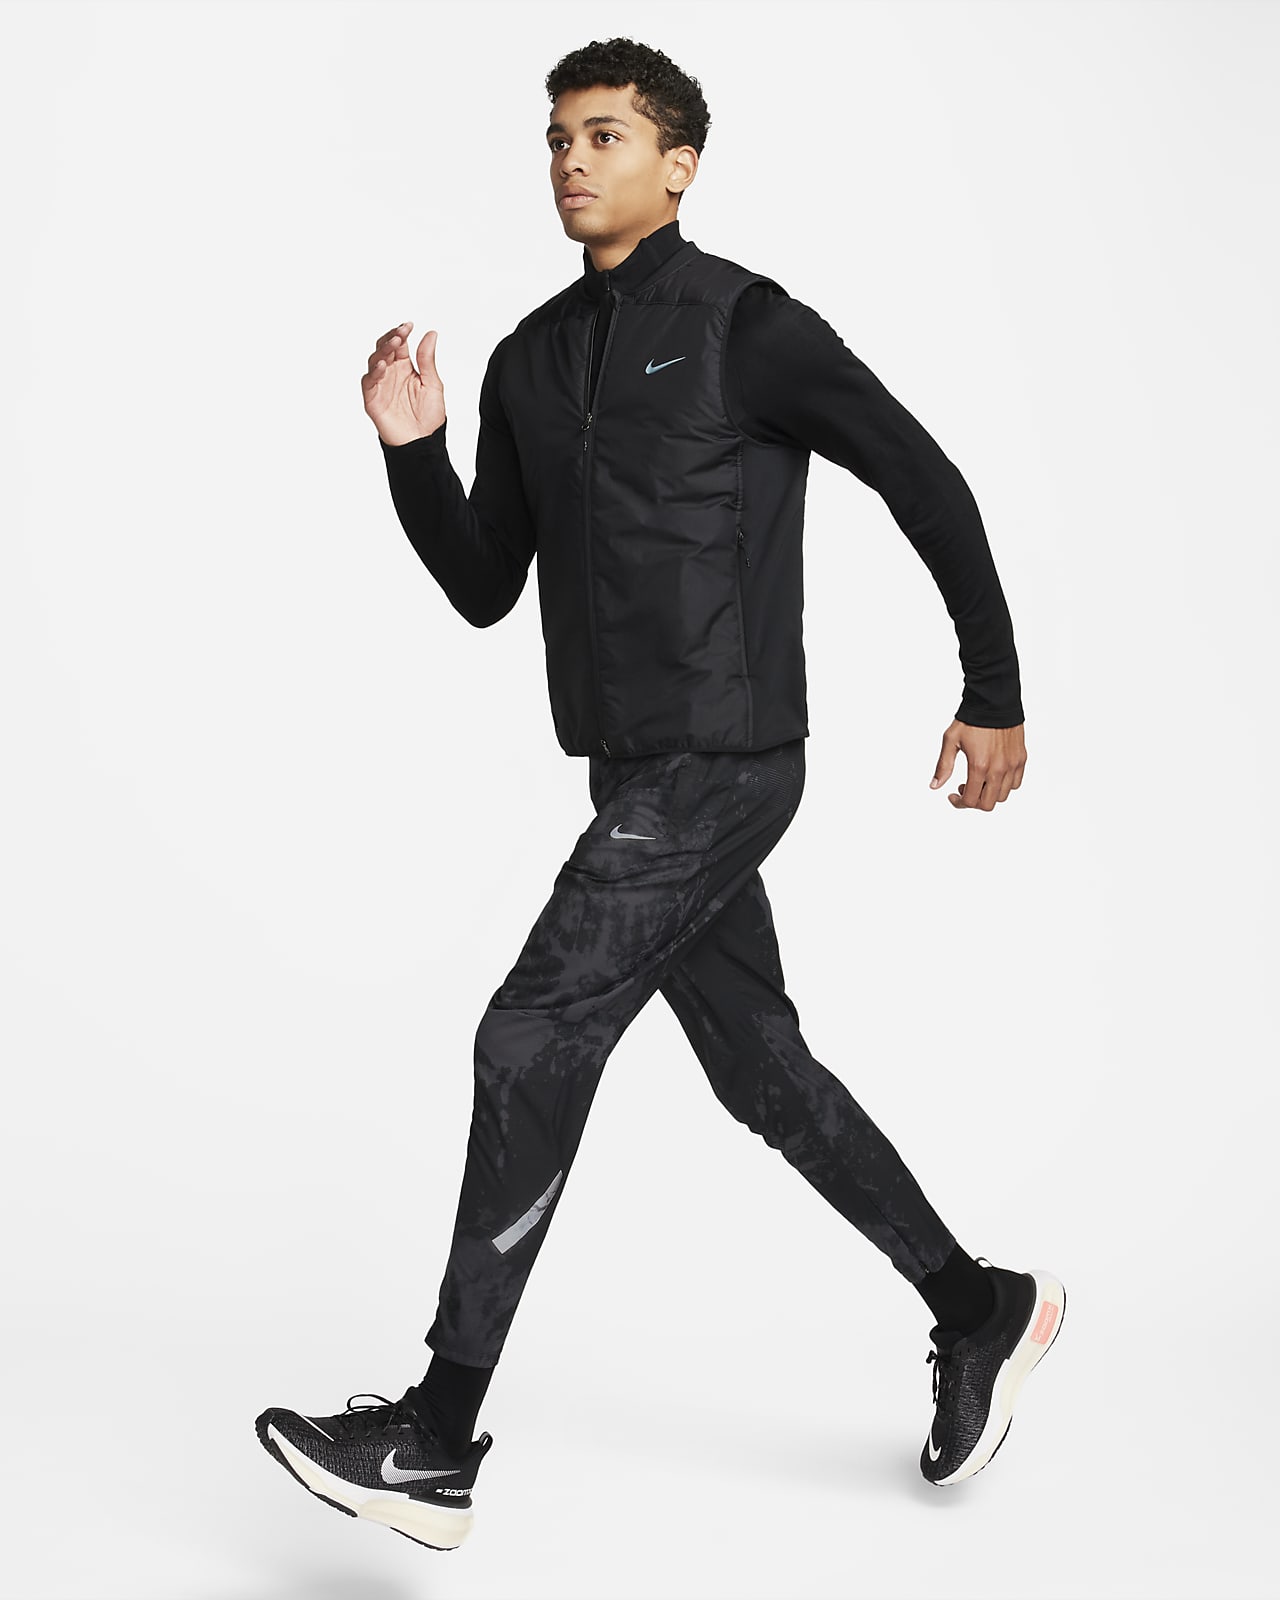 Nike Running Division Men's Therma-FIT ADV Running Vest.